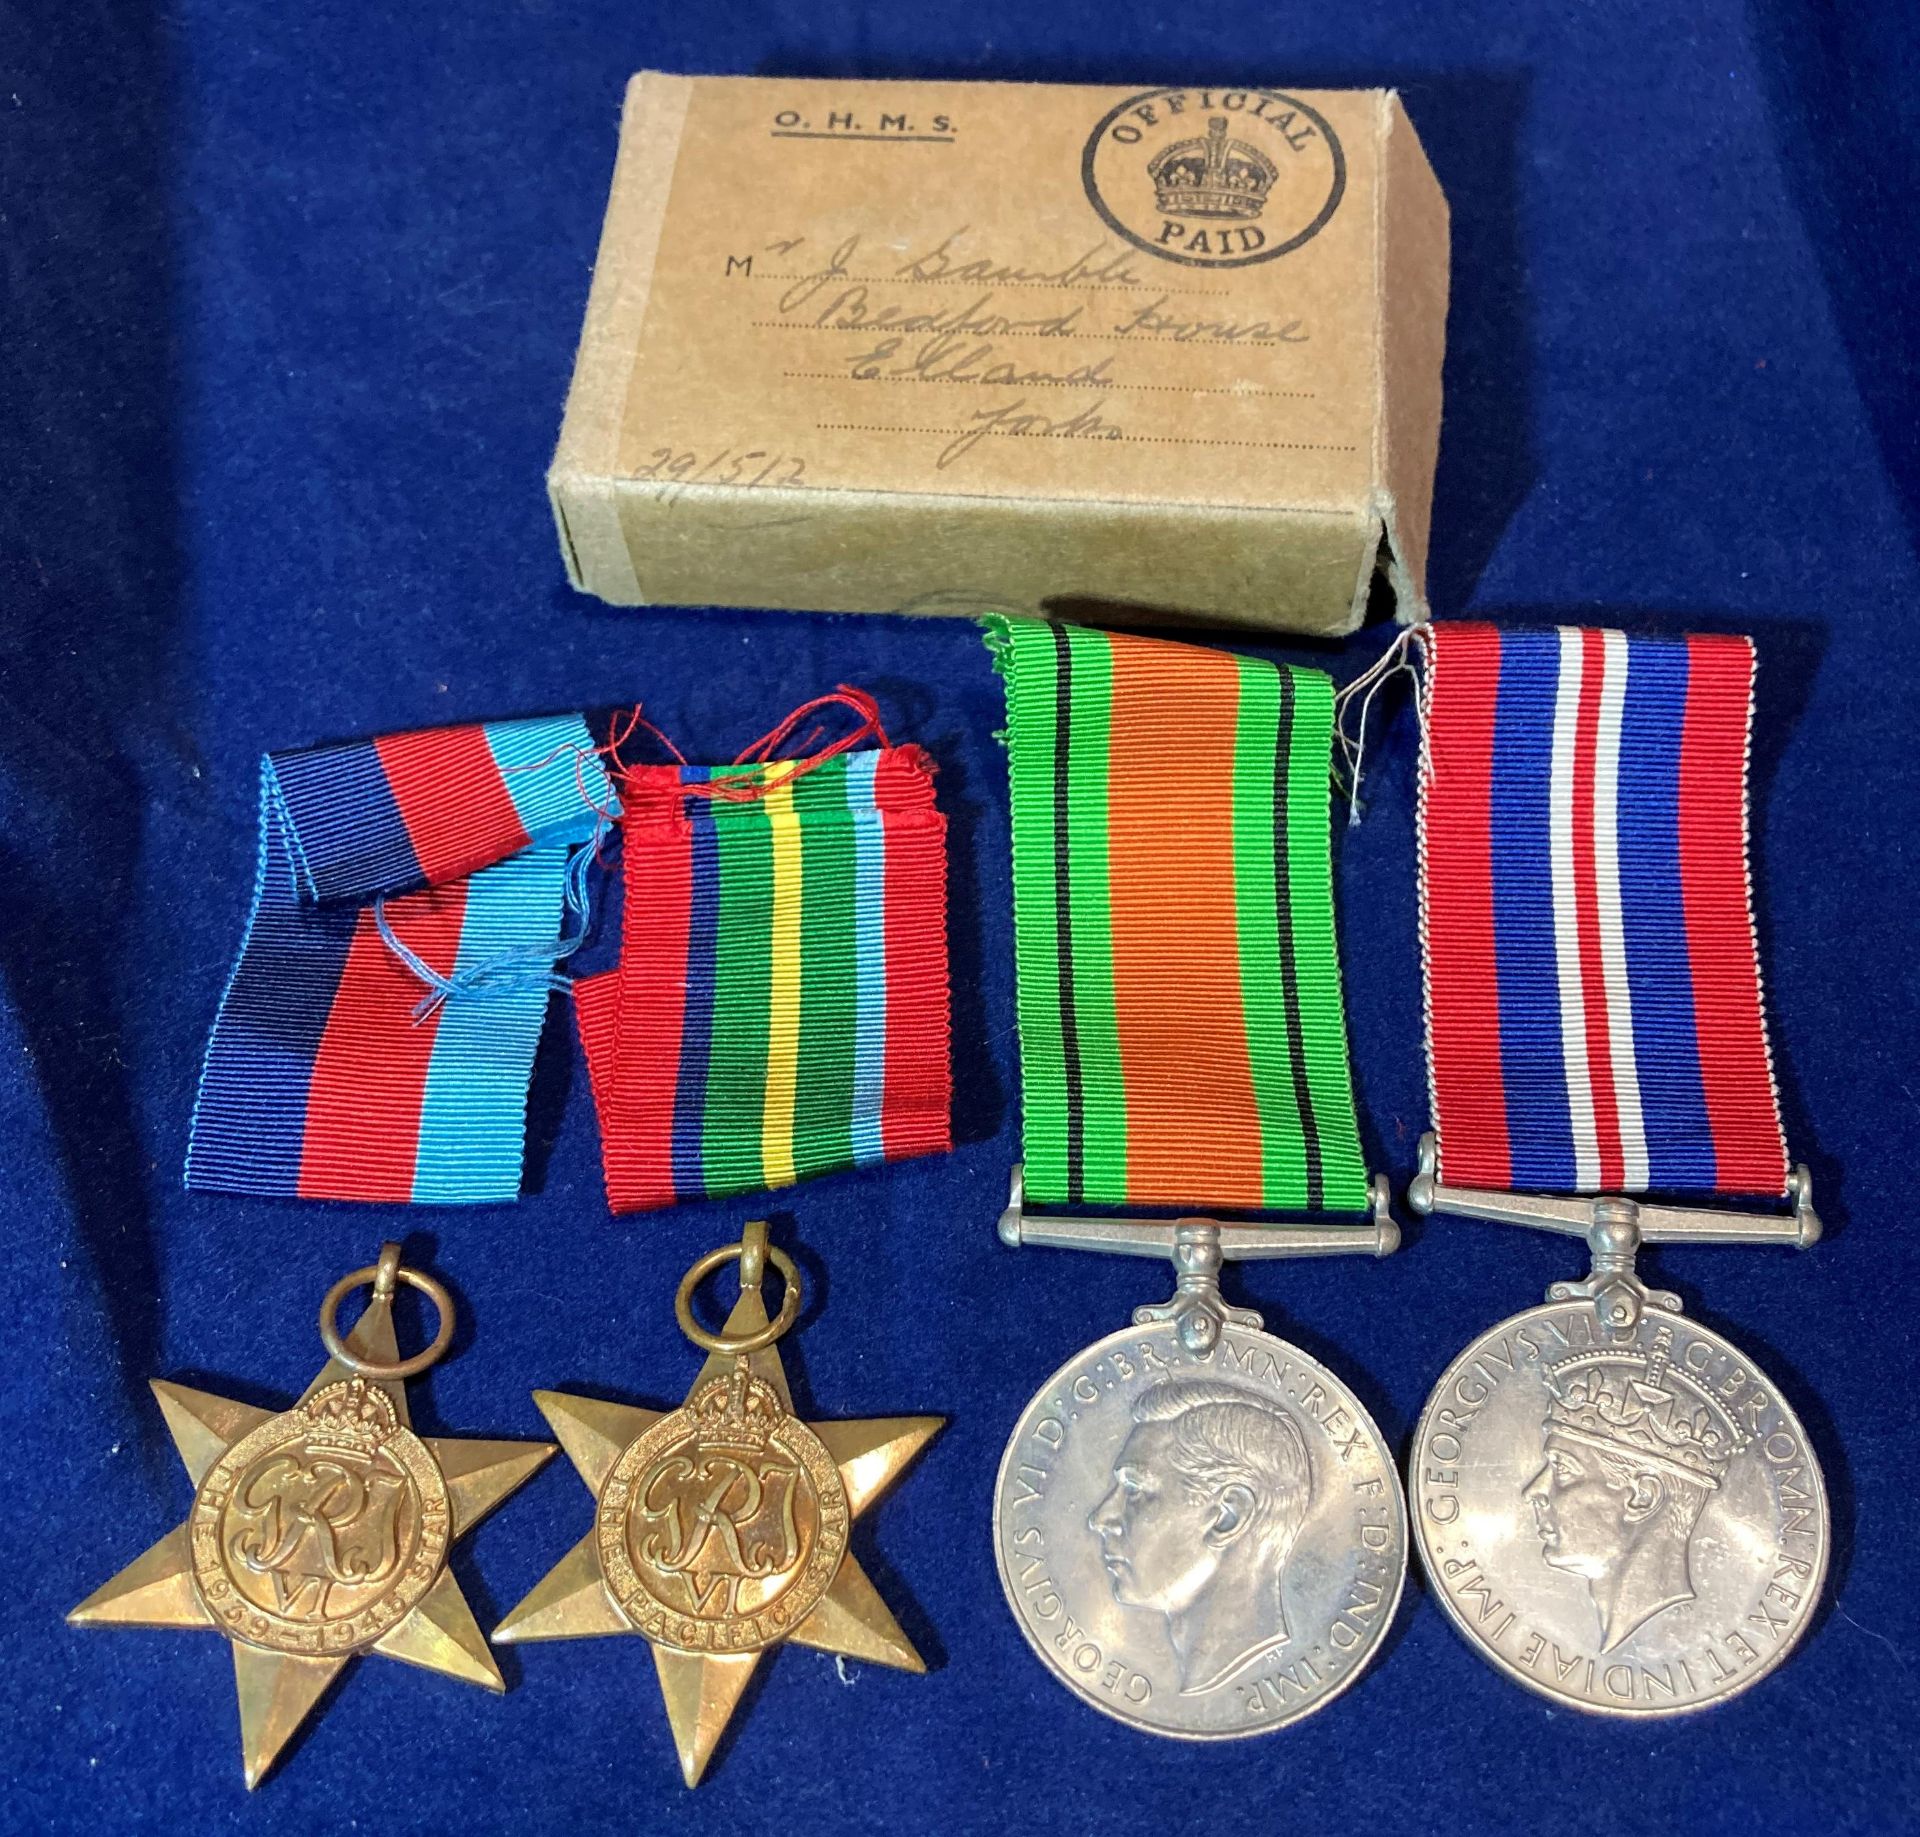 Contents to tray - two First World War medals - British World War Medal 1914-1918 and Victory Medal - Bild 4 aus 13